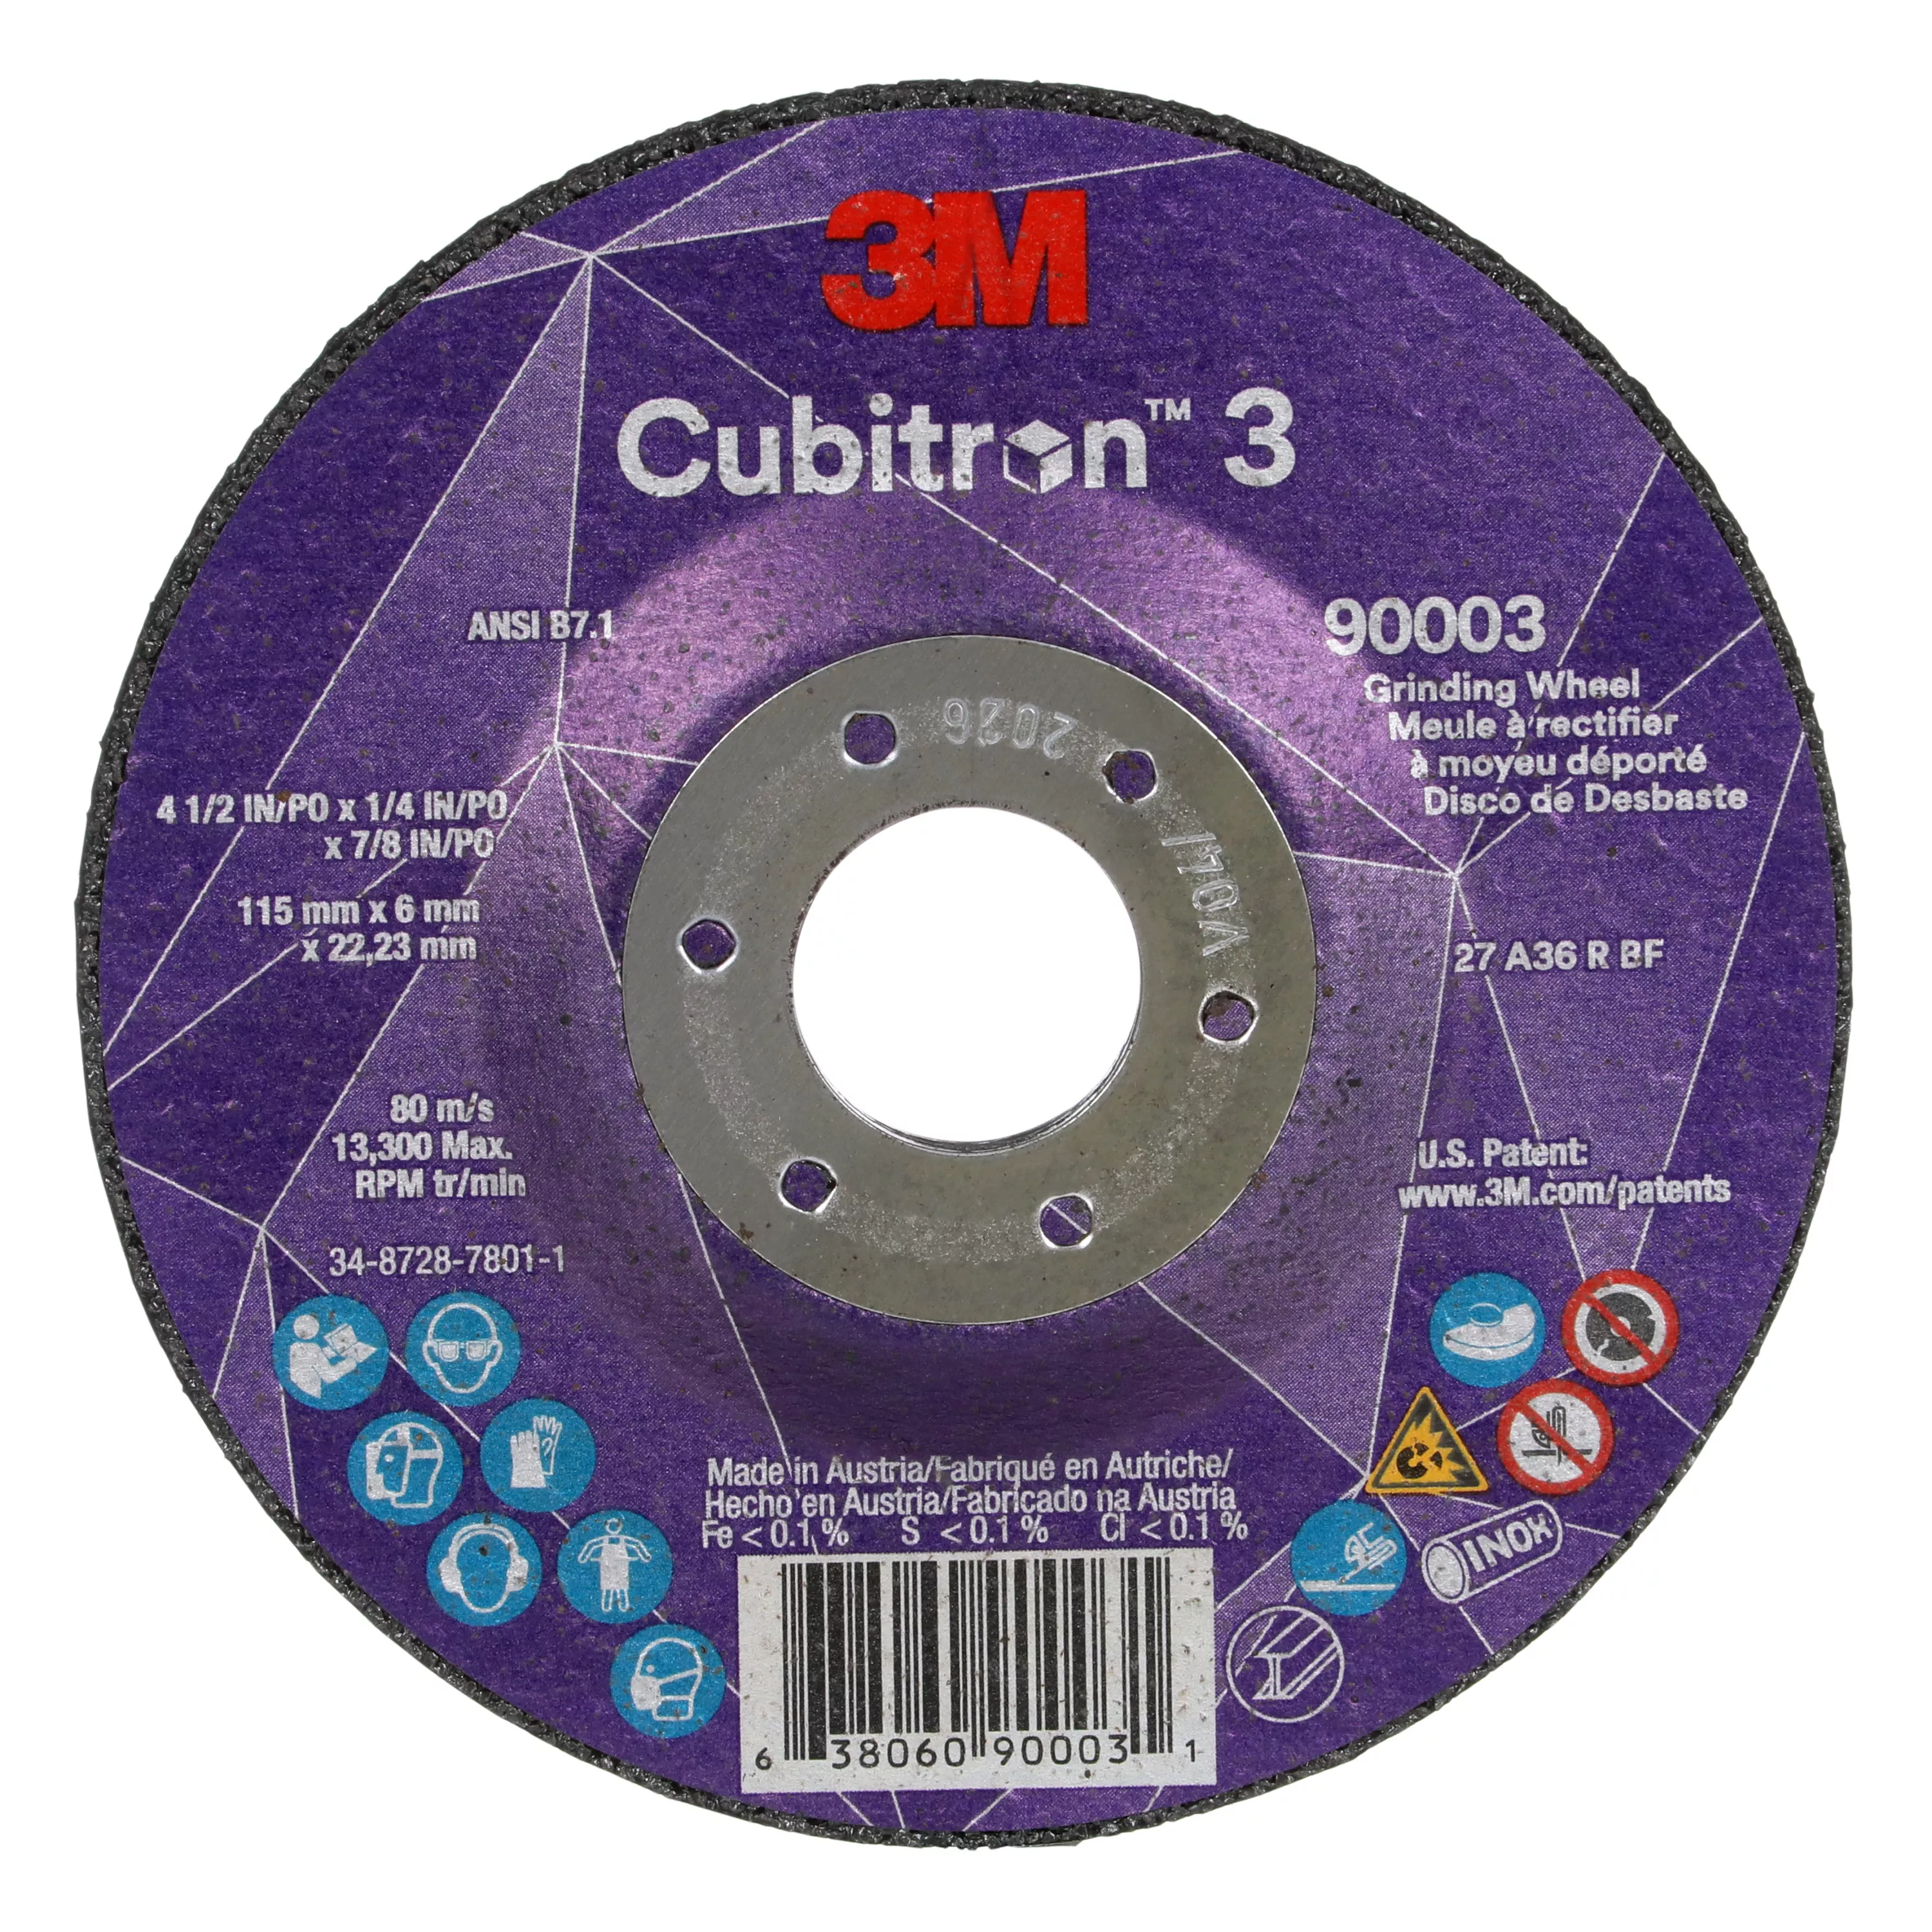 3M™ Cubitron™ 3 Depressed Center Grinding Wheel, 90003, 36+, T27, 4-1/2
in x 1/4 in x7/8 in (11x6x22.23) ANSI, 10/Pack, 20 ea/Case